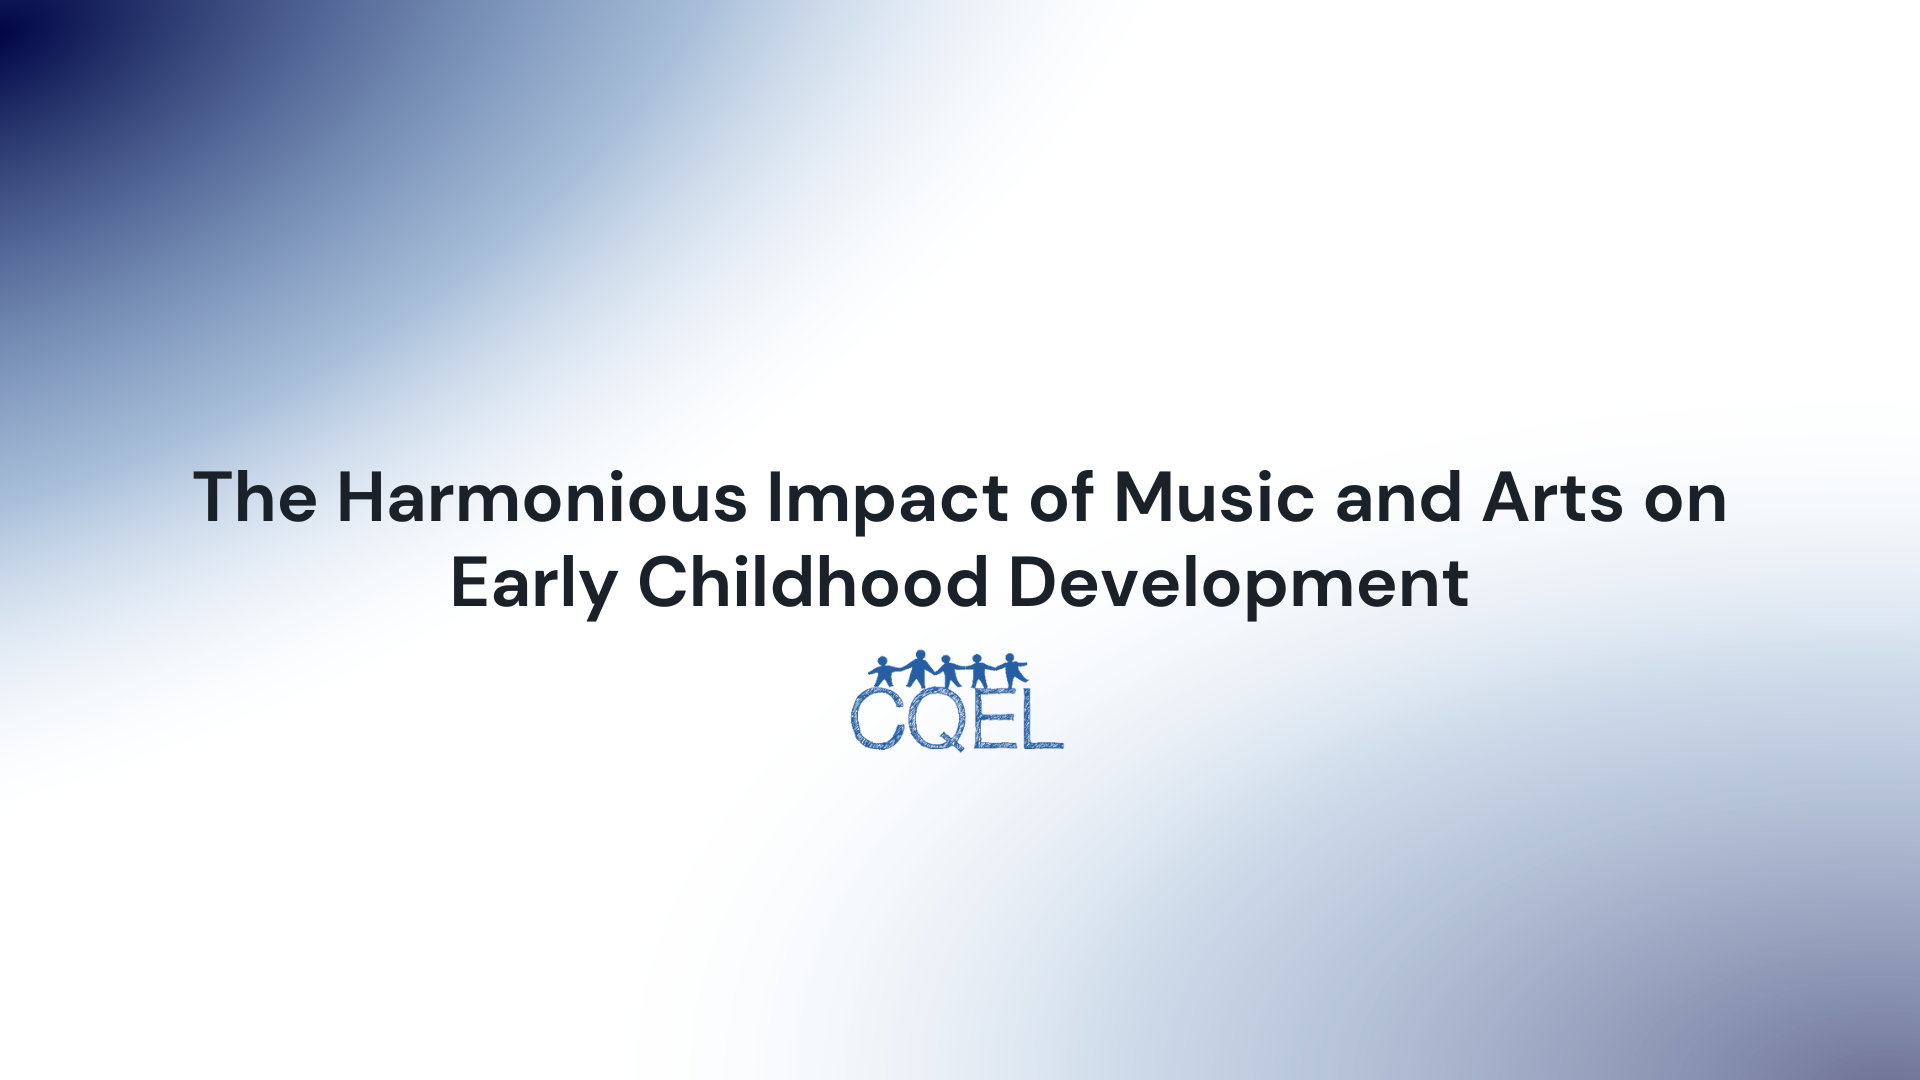 The Harmonious Impact of Music and Arts on Early Childhood Development